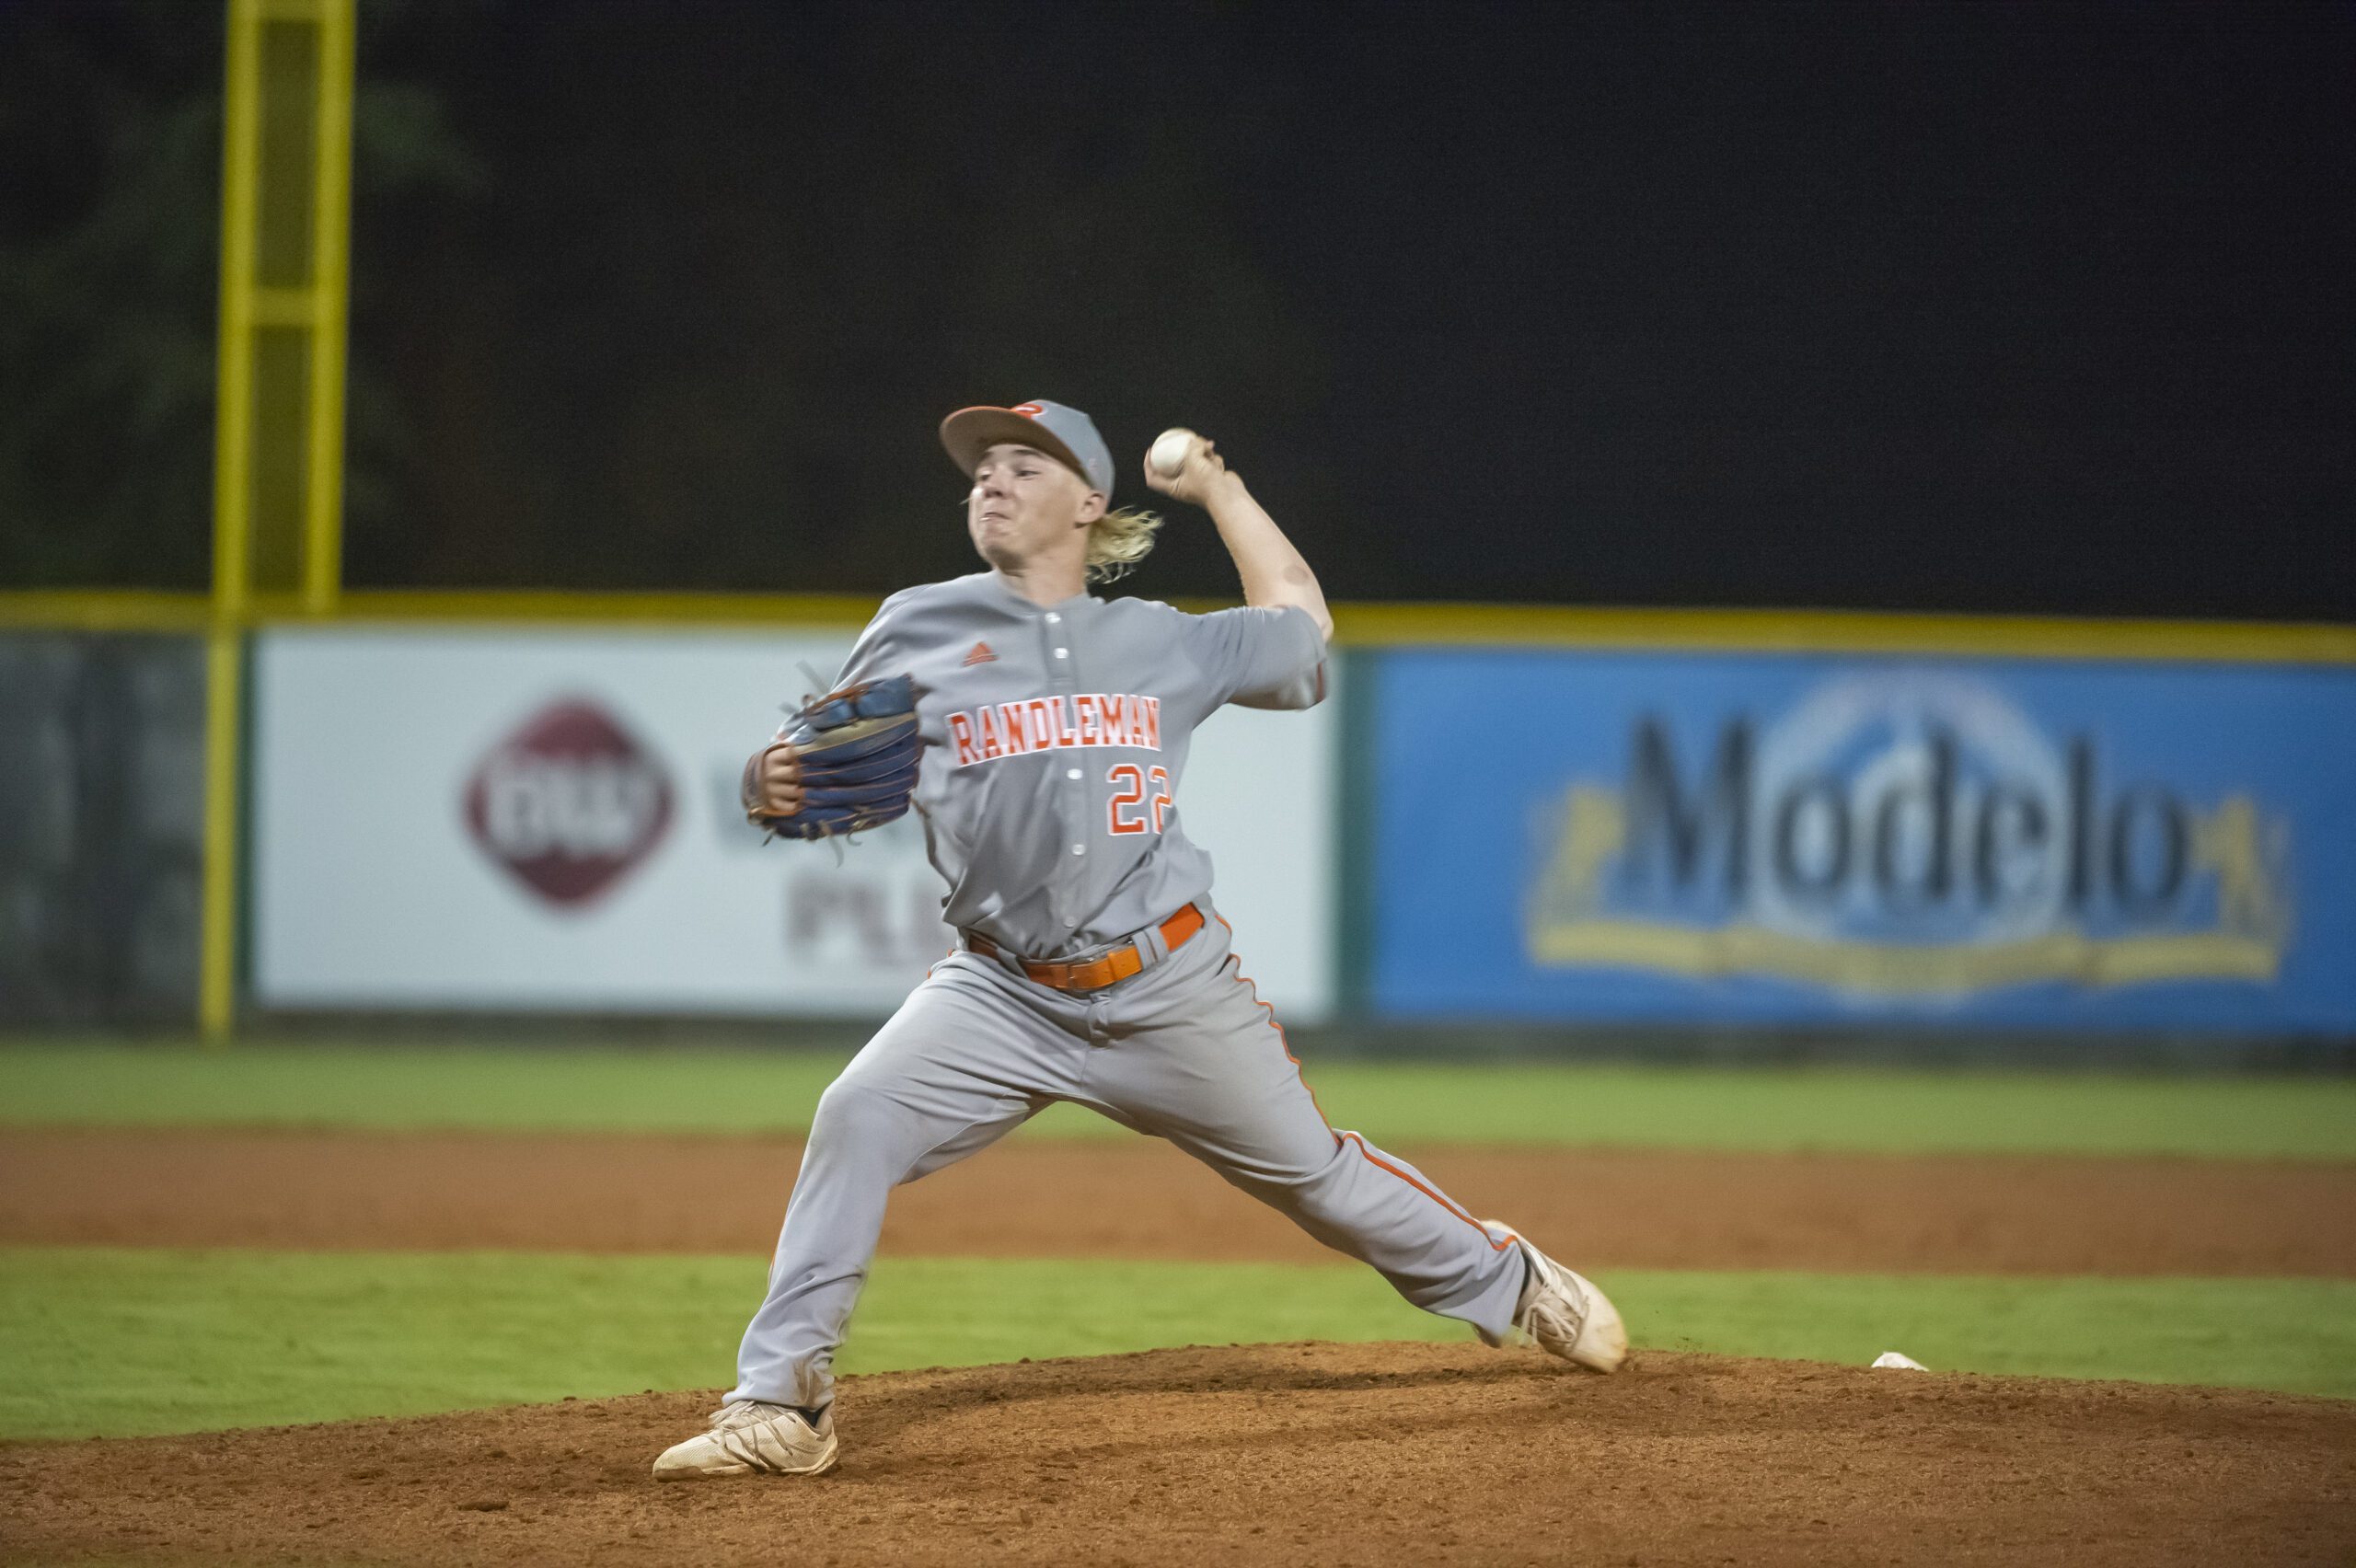 Randleman's Brannon: 'Feels like a dream' after Red Sox select him in draft  - Randolph Record